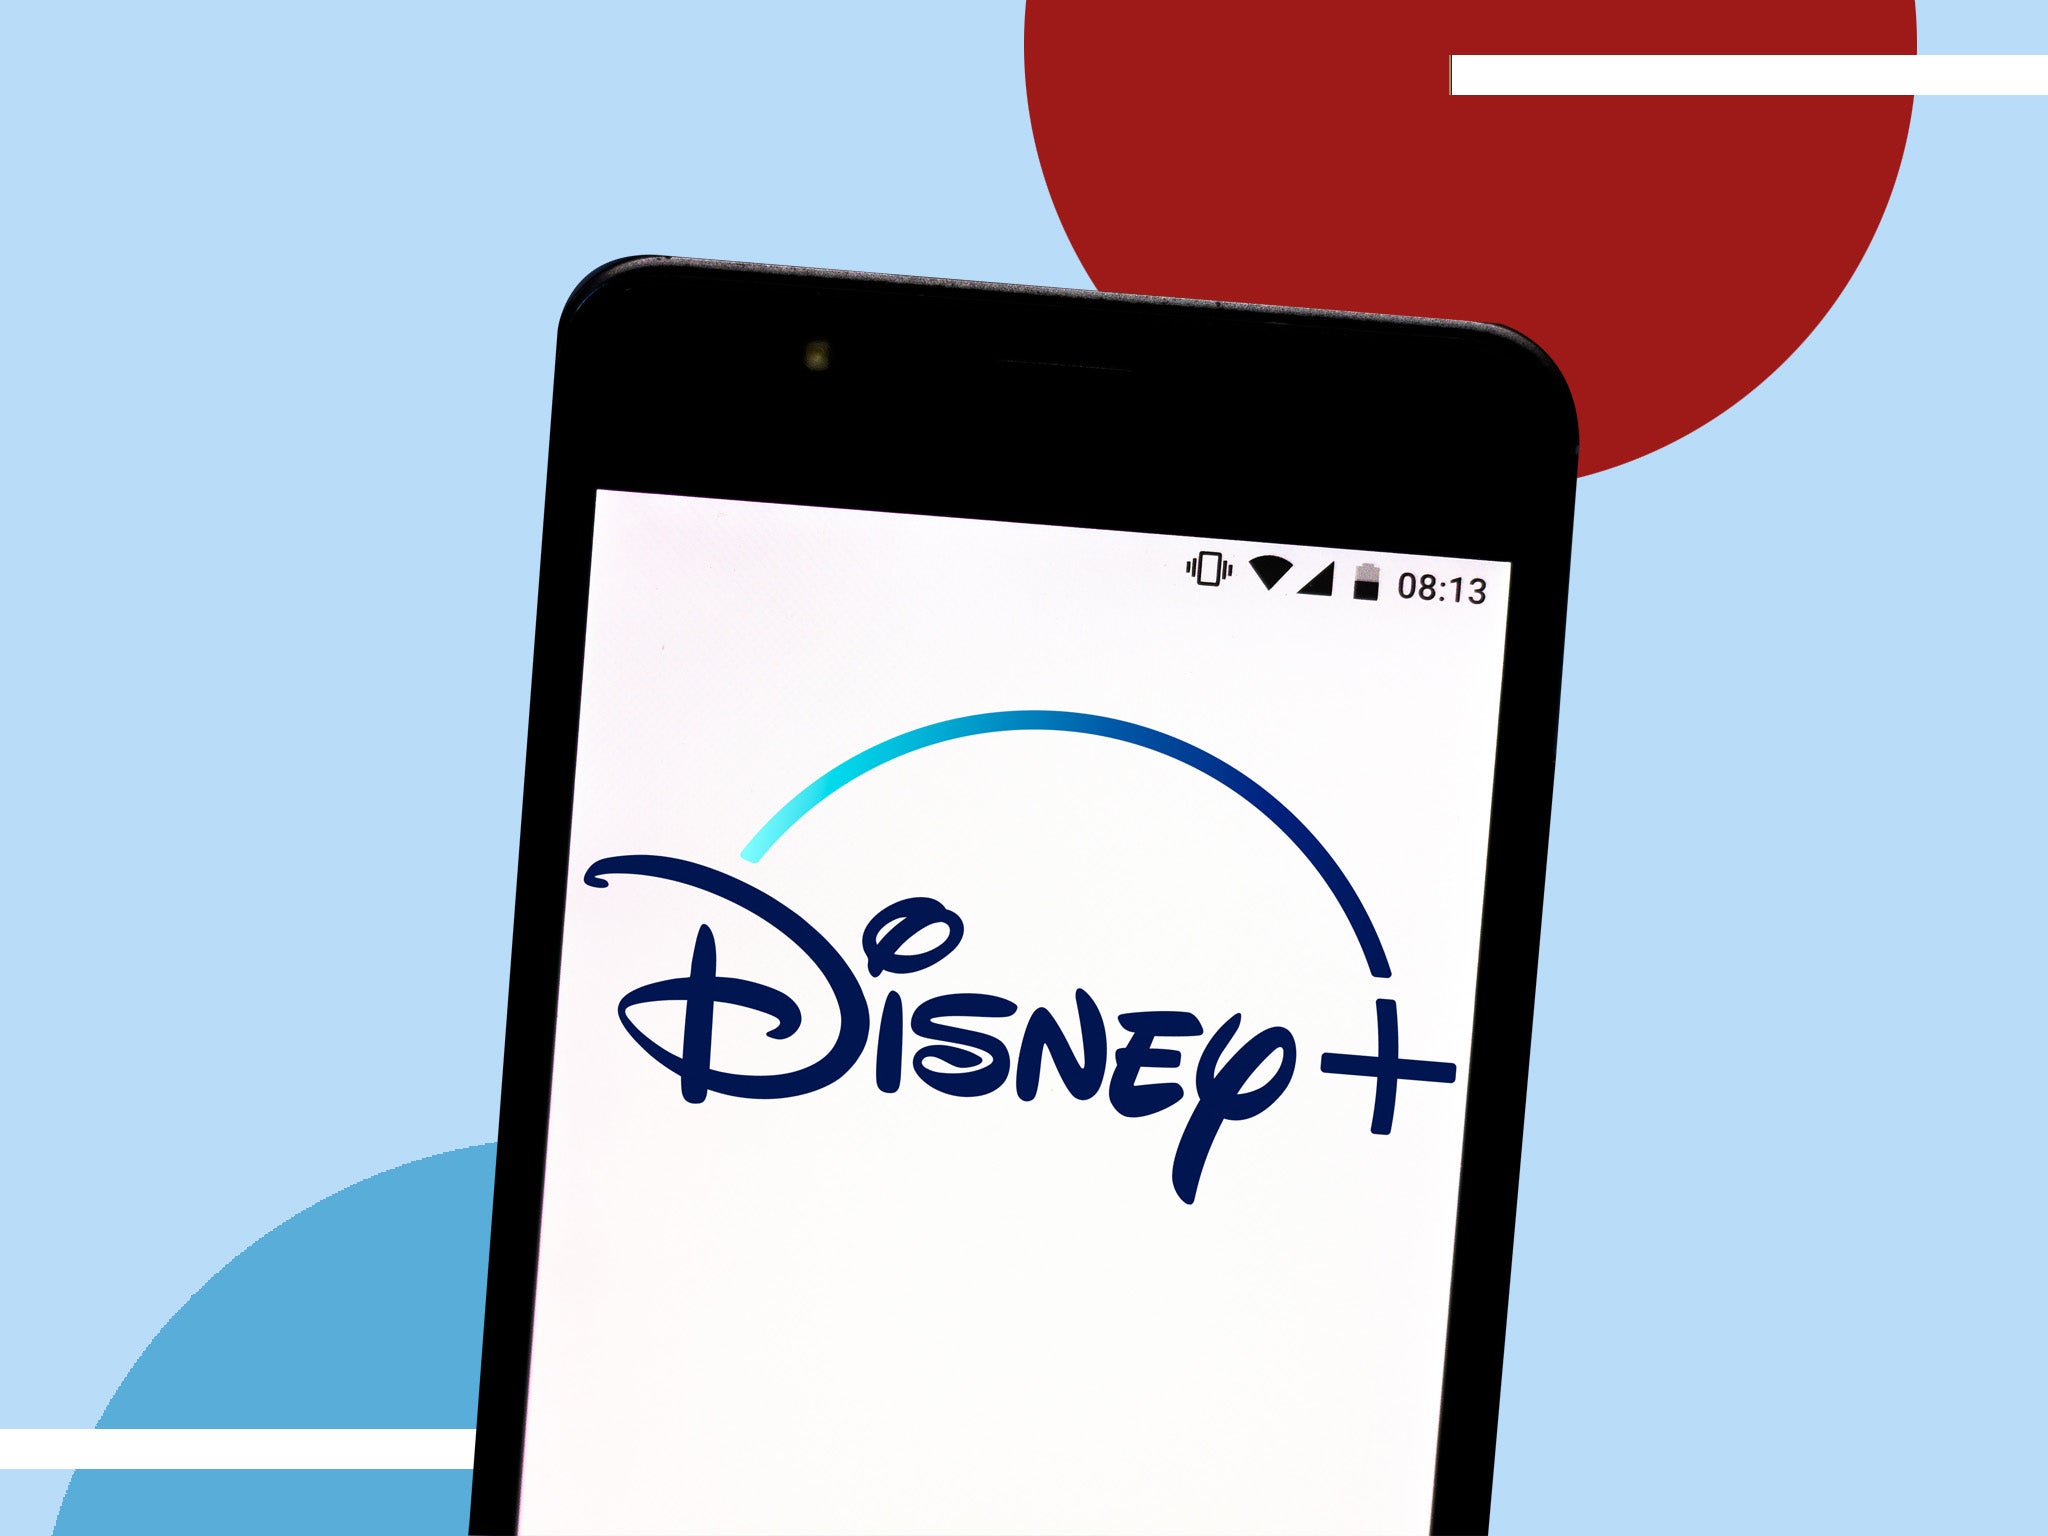 The Disney+ app is available on smart TVs, streaming devices, tablets and smartphones